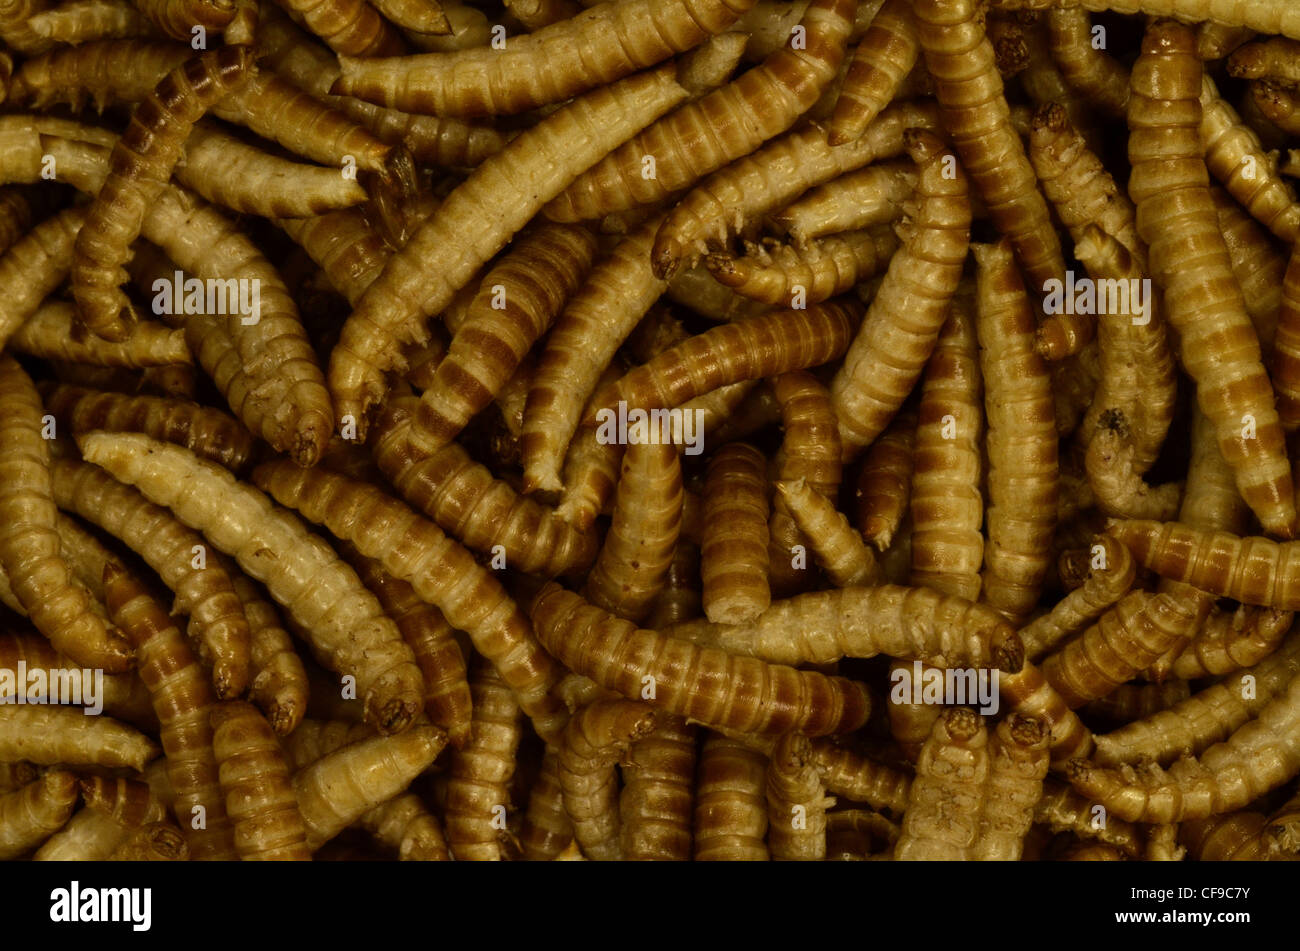 Freeze-dried Buffalo Worms / Alphitobius diaperinus for human food. Open a can of worms metaphor. Stock Photo